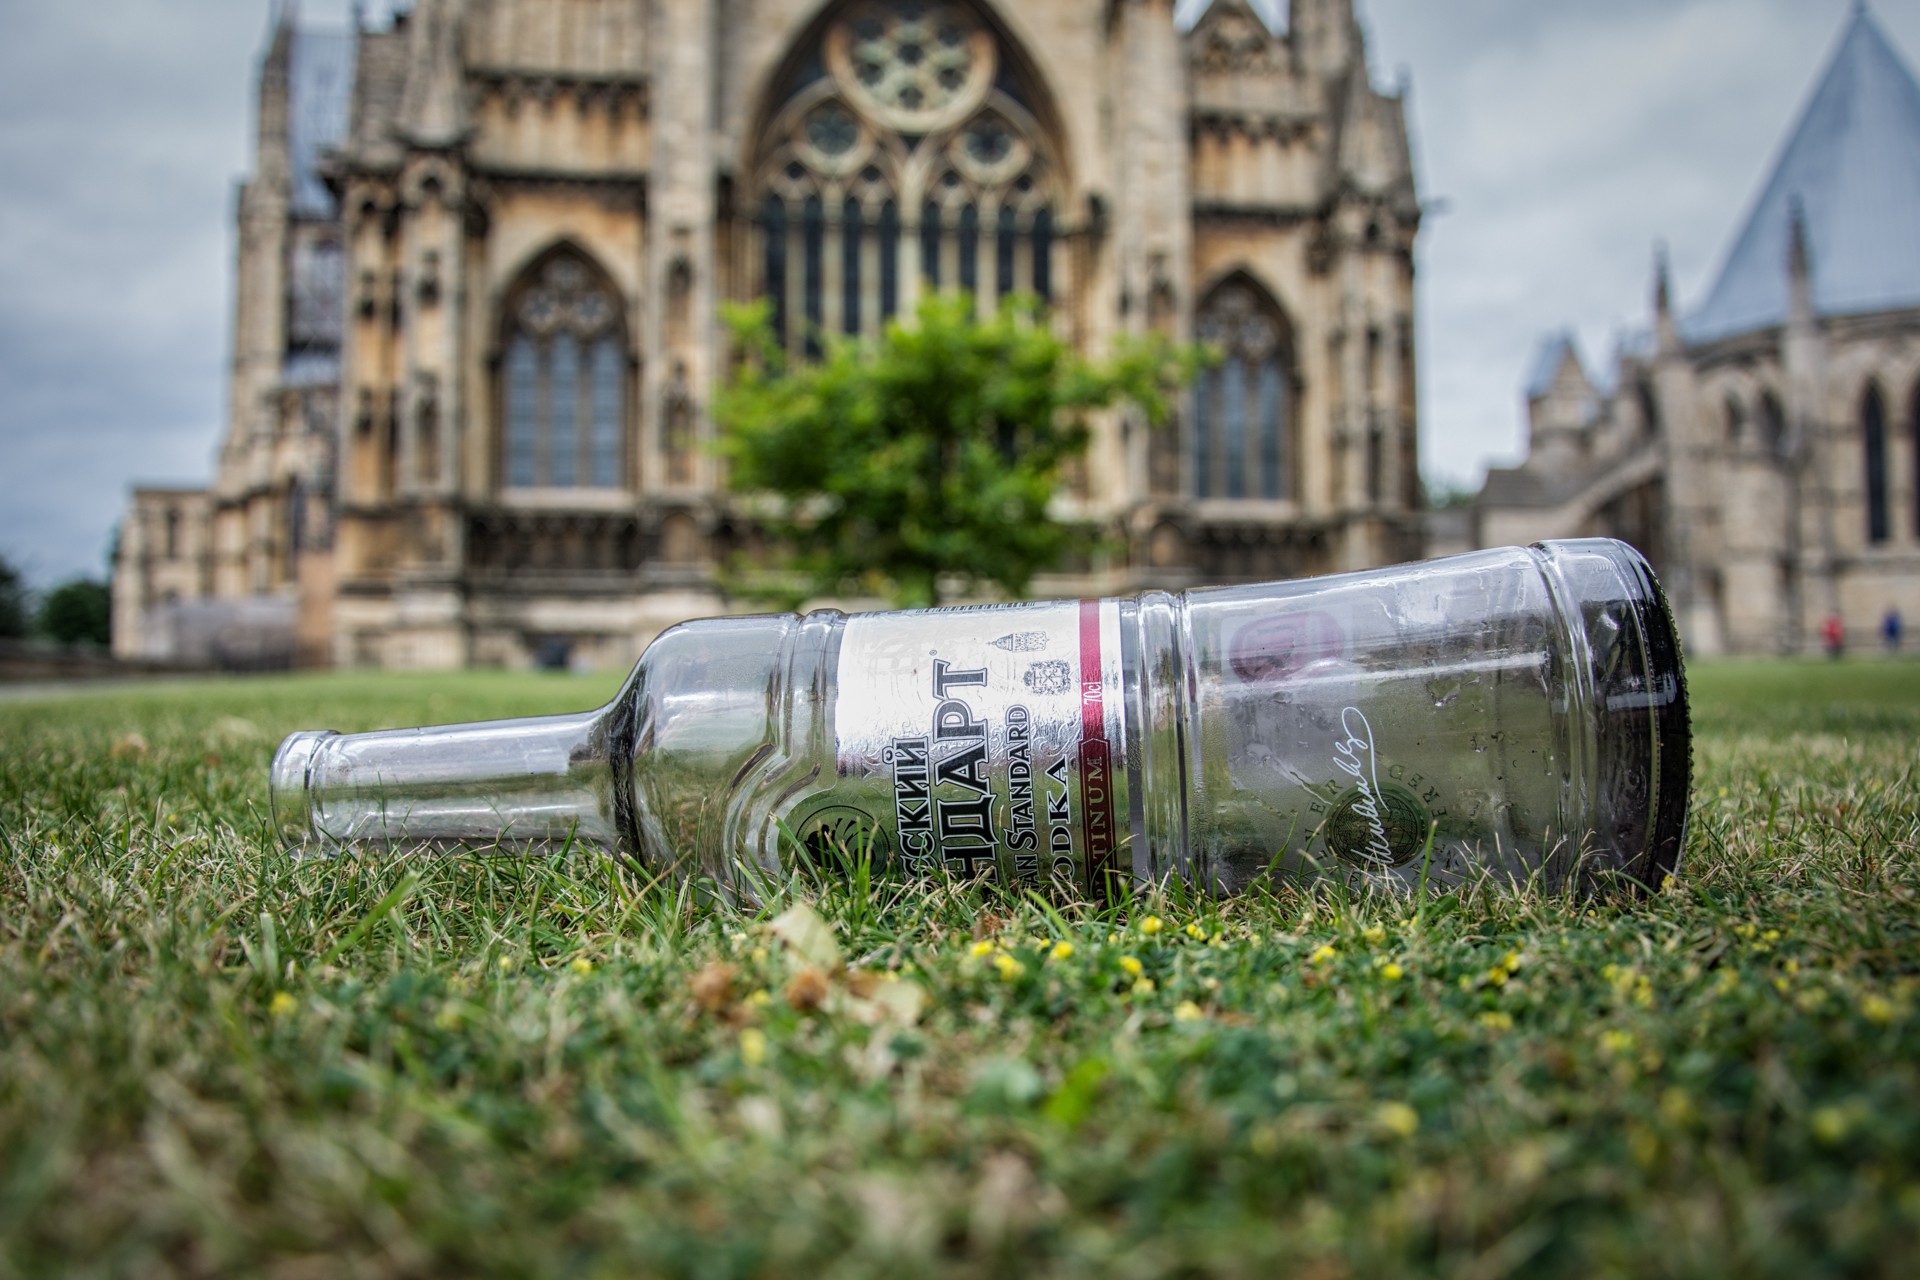 General 1920x1280 bottles grass building Russian vodka on the ground outdoors depth of field